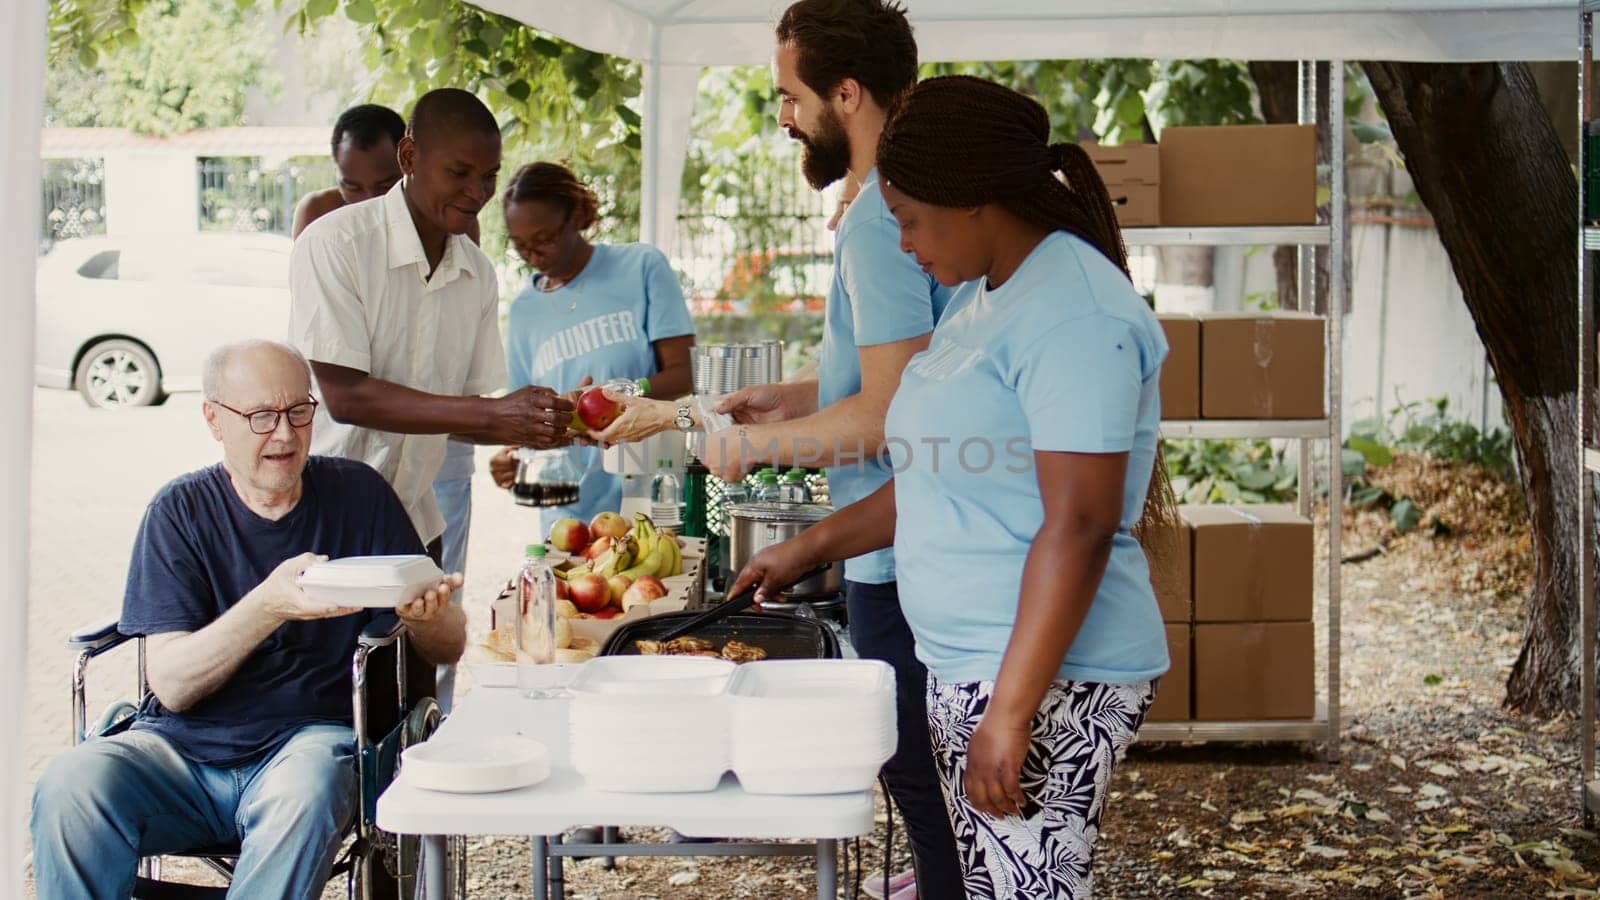 Volunteers assist the disabled with food by DCStudio